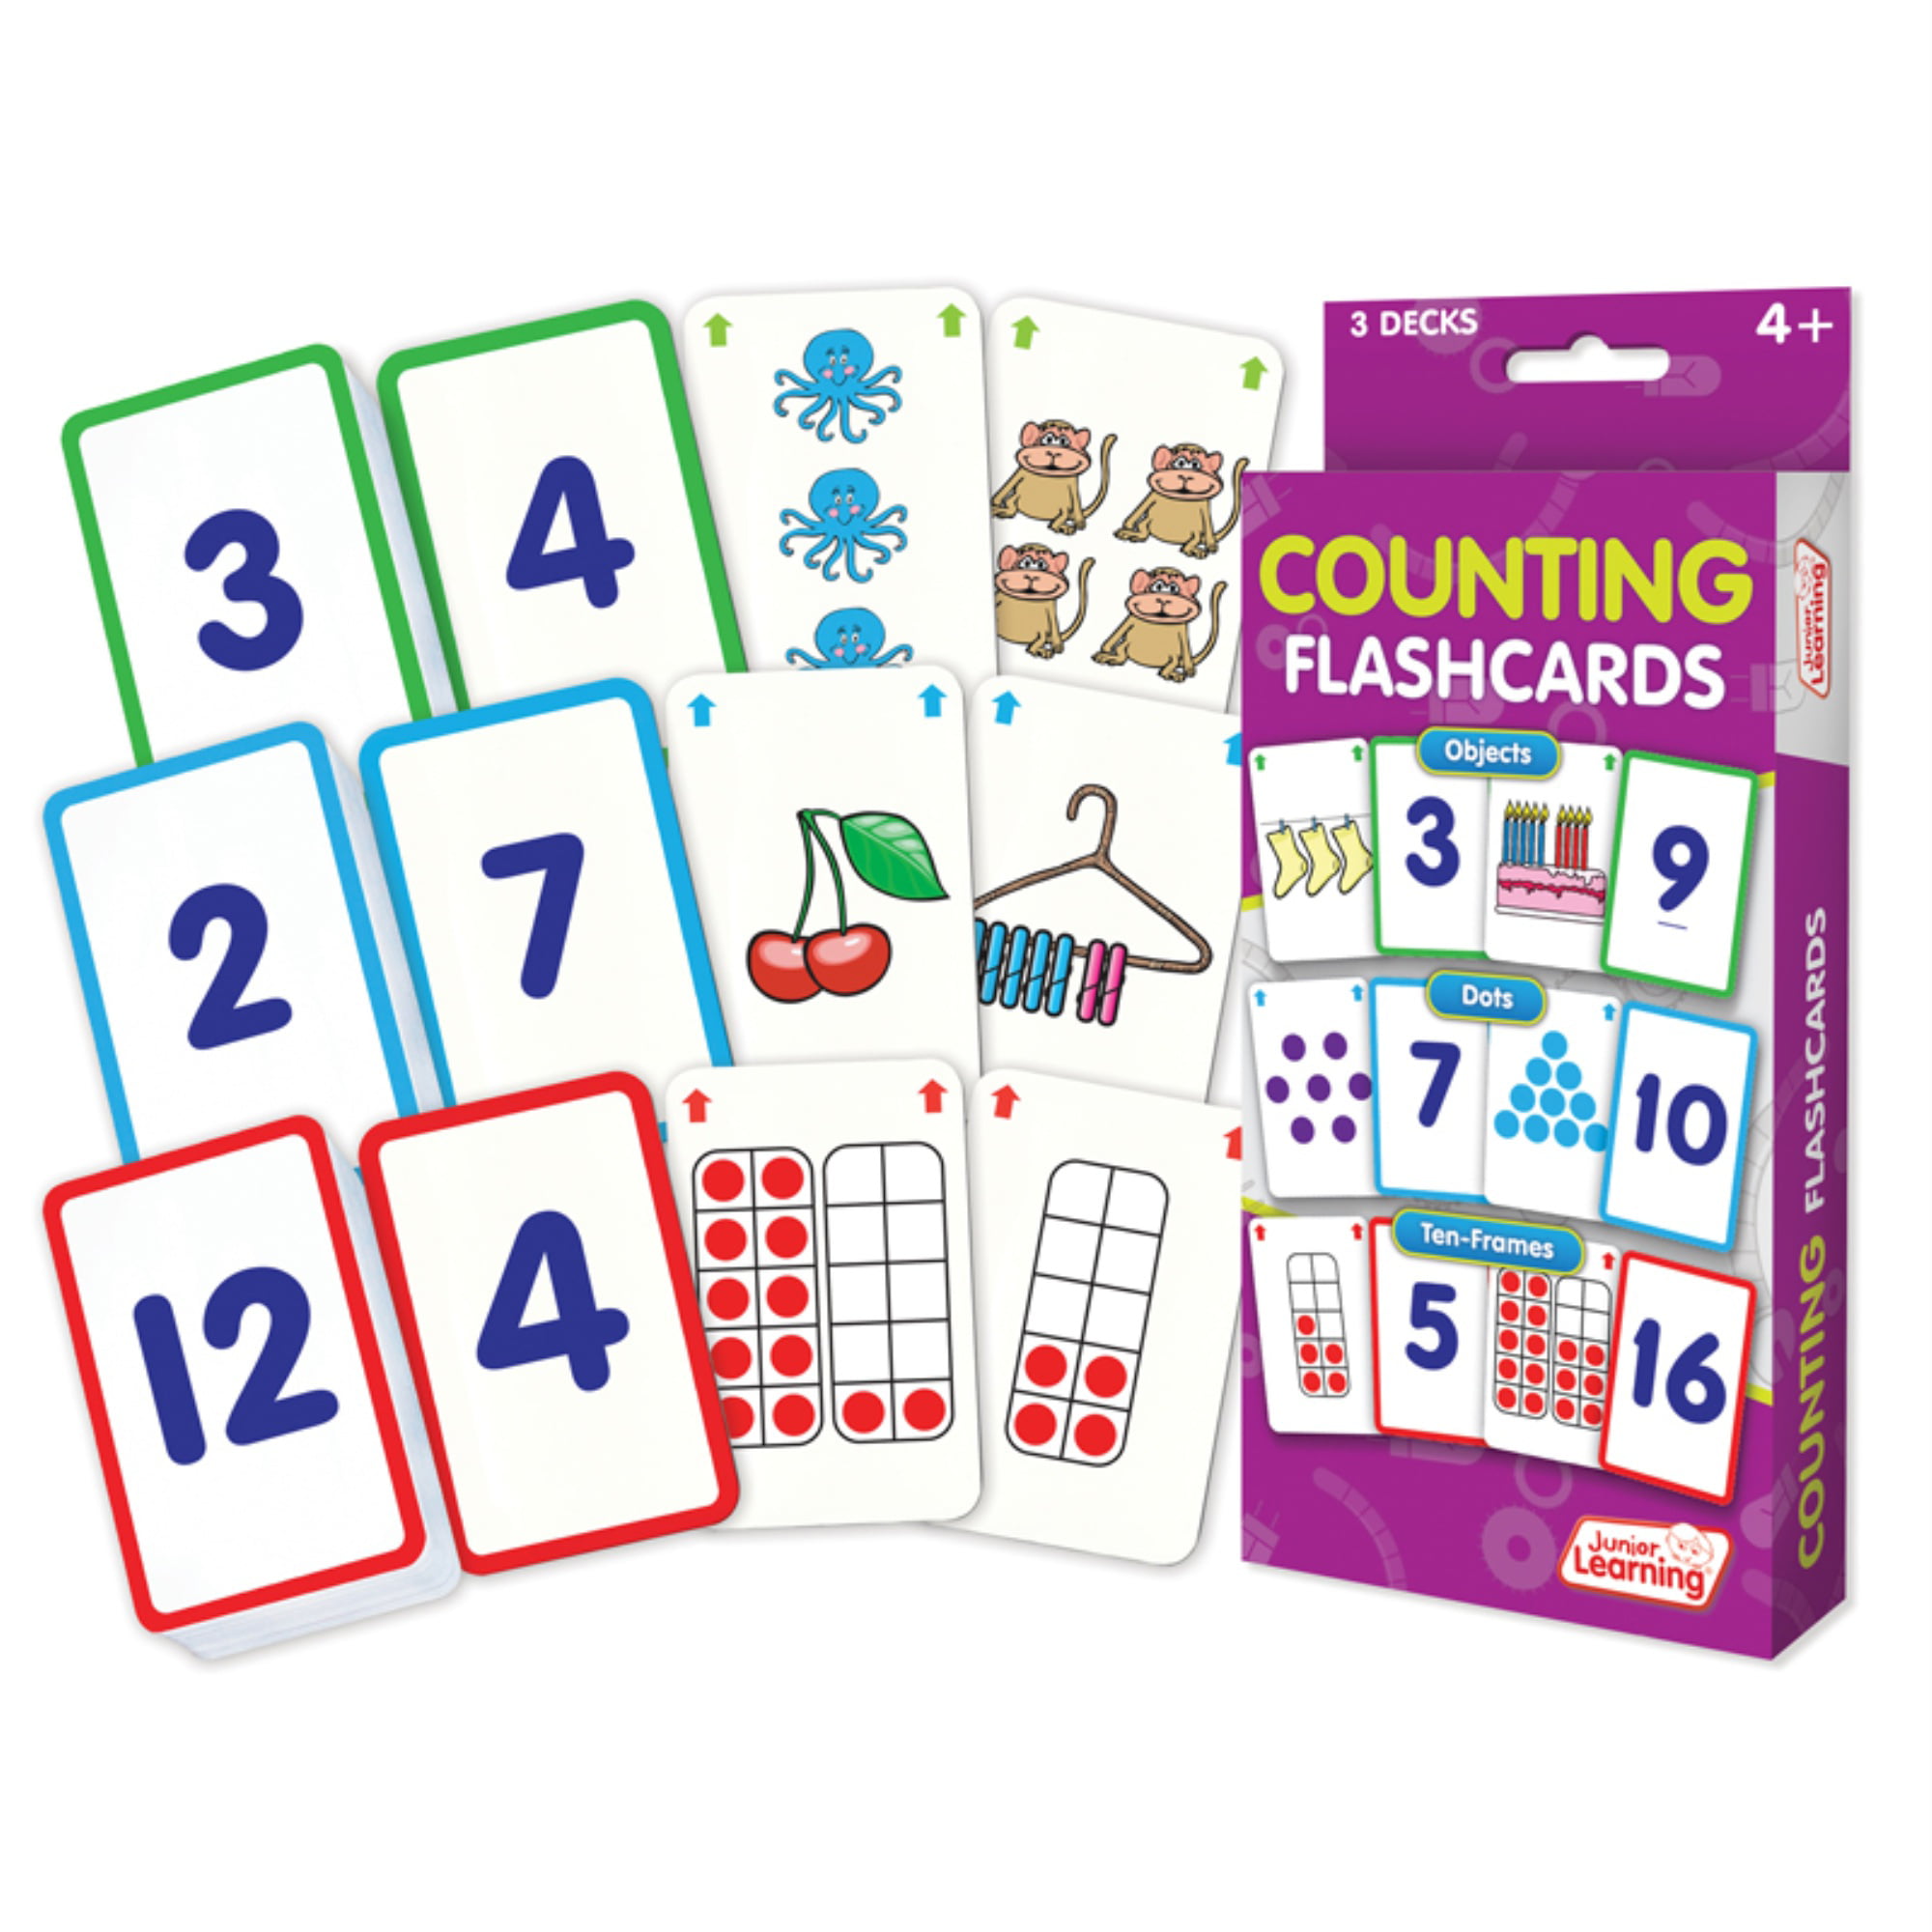 counting-flash-cards-bundle-of-5-walmart